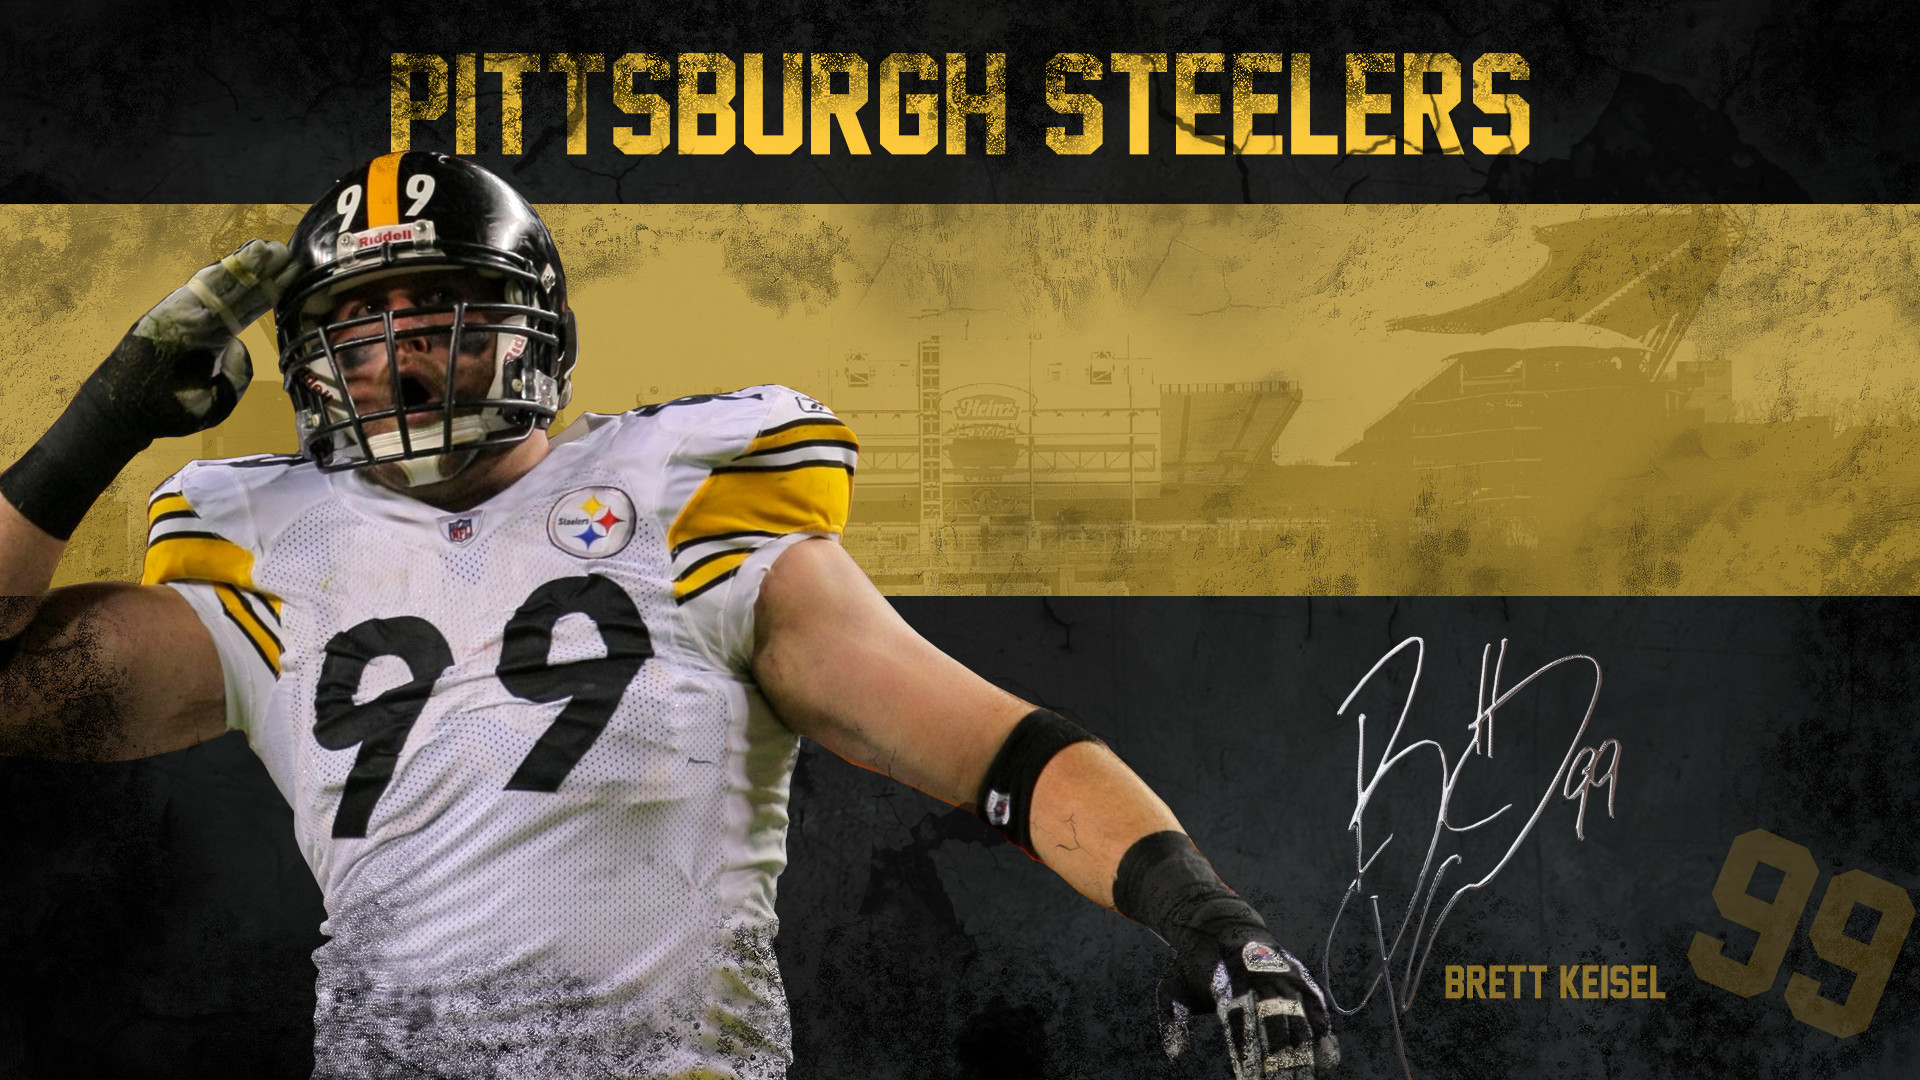 1920x1080 Pittsburgh Steelers images Brett Keisel Wallpaper HD wallpaper and  background photos